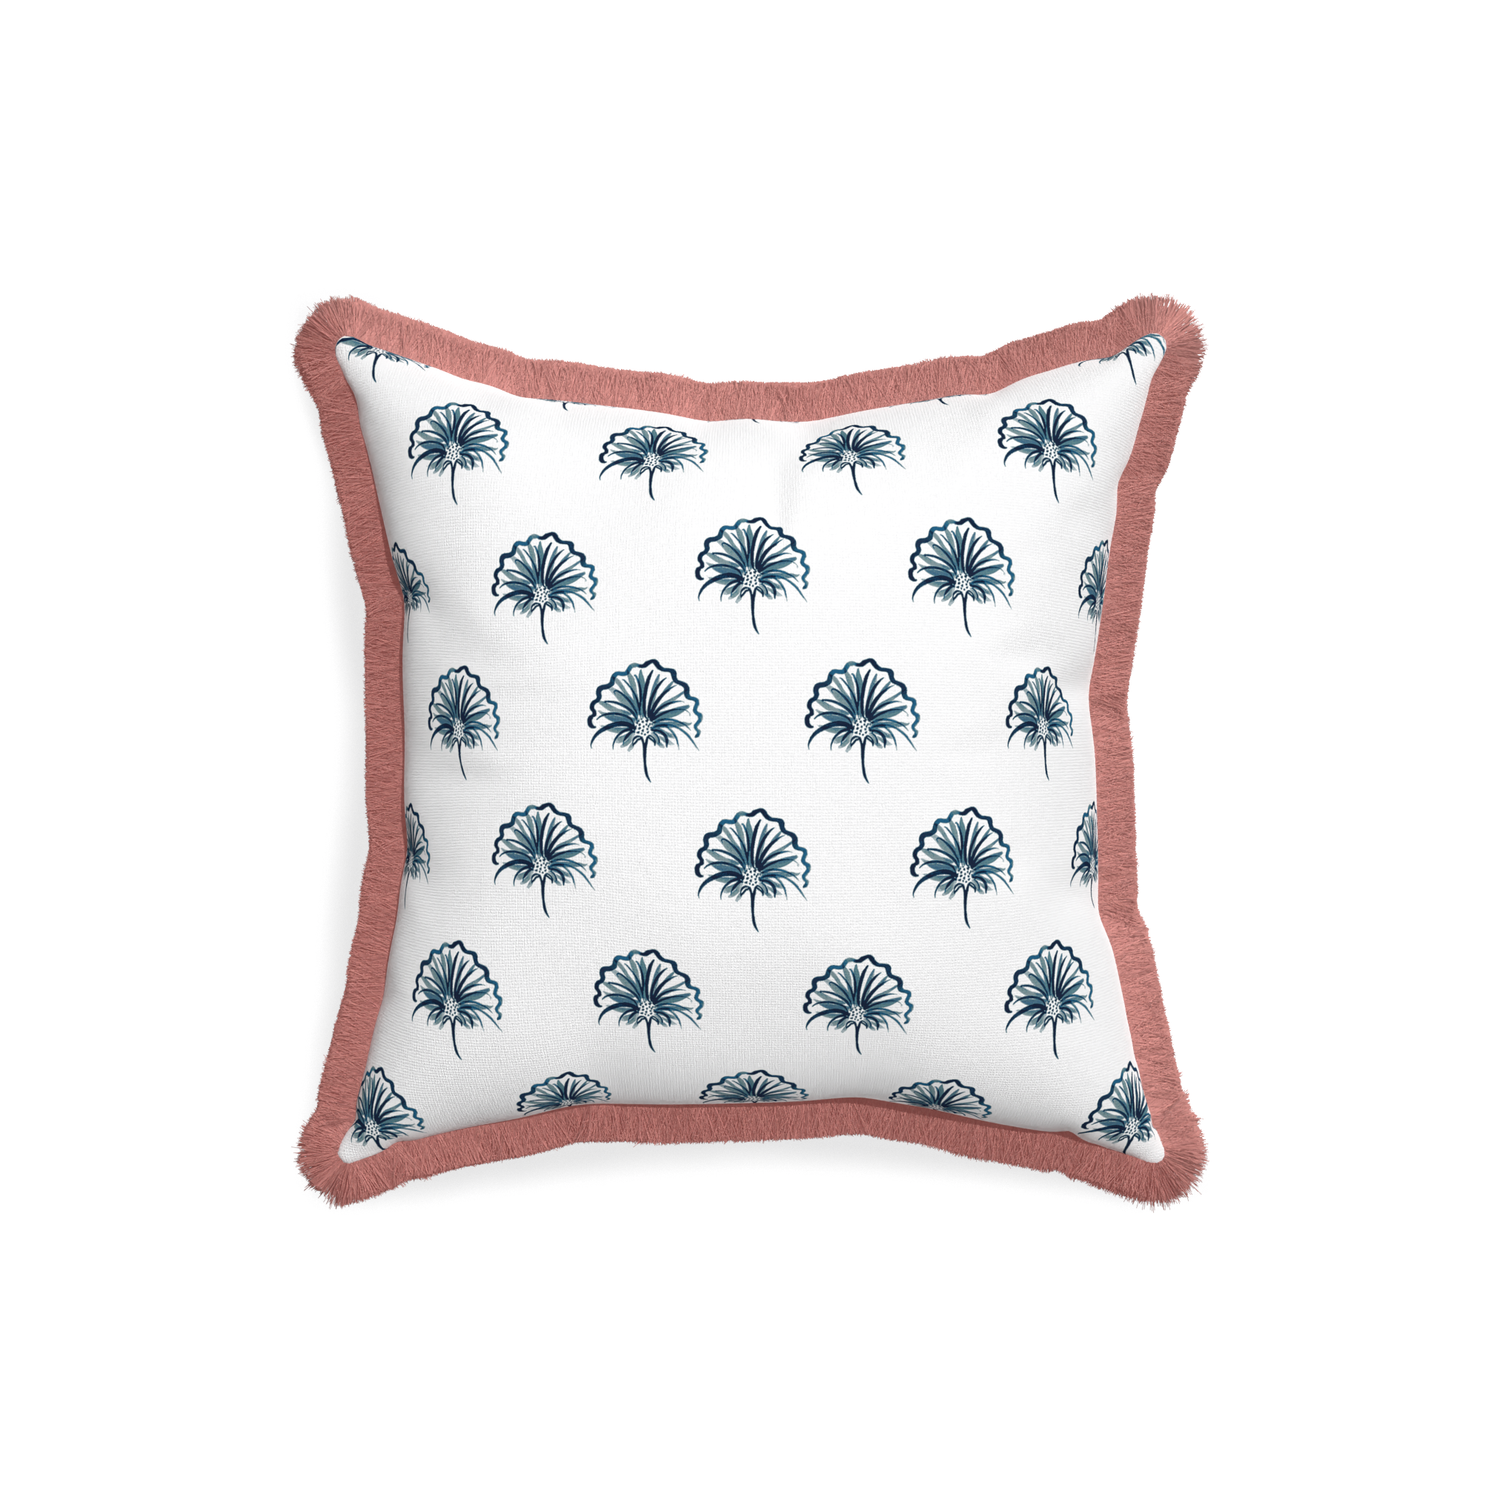 18-square penelope midnight custom floral navypillow with d fringe on white background